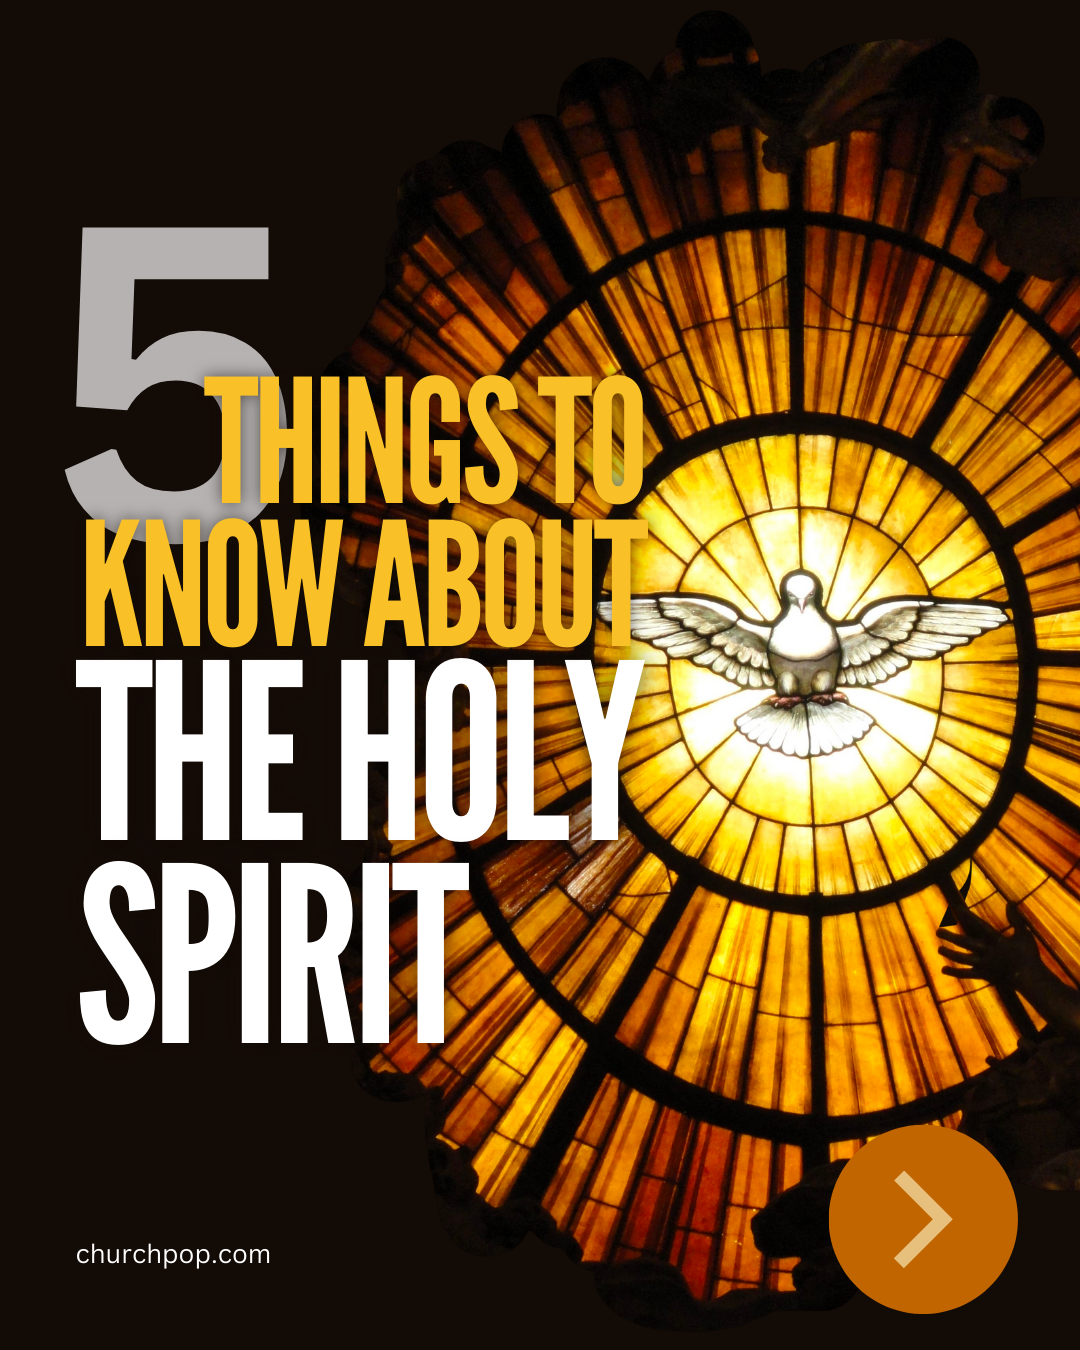 Who is the holy spirit? what is the holy spirit?